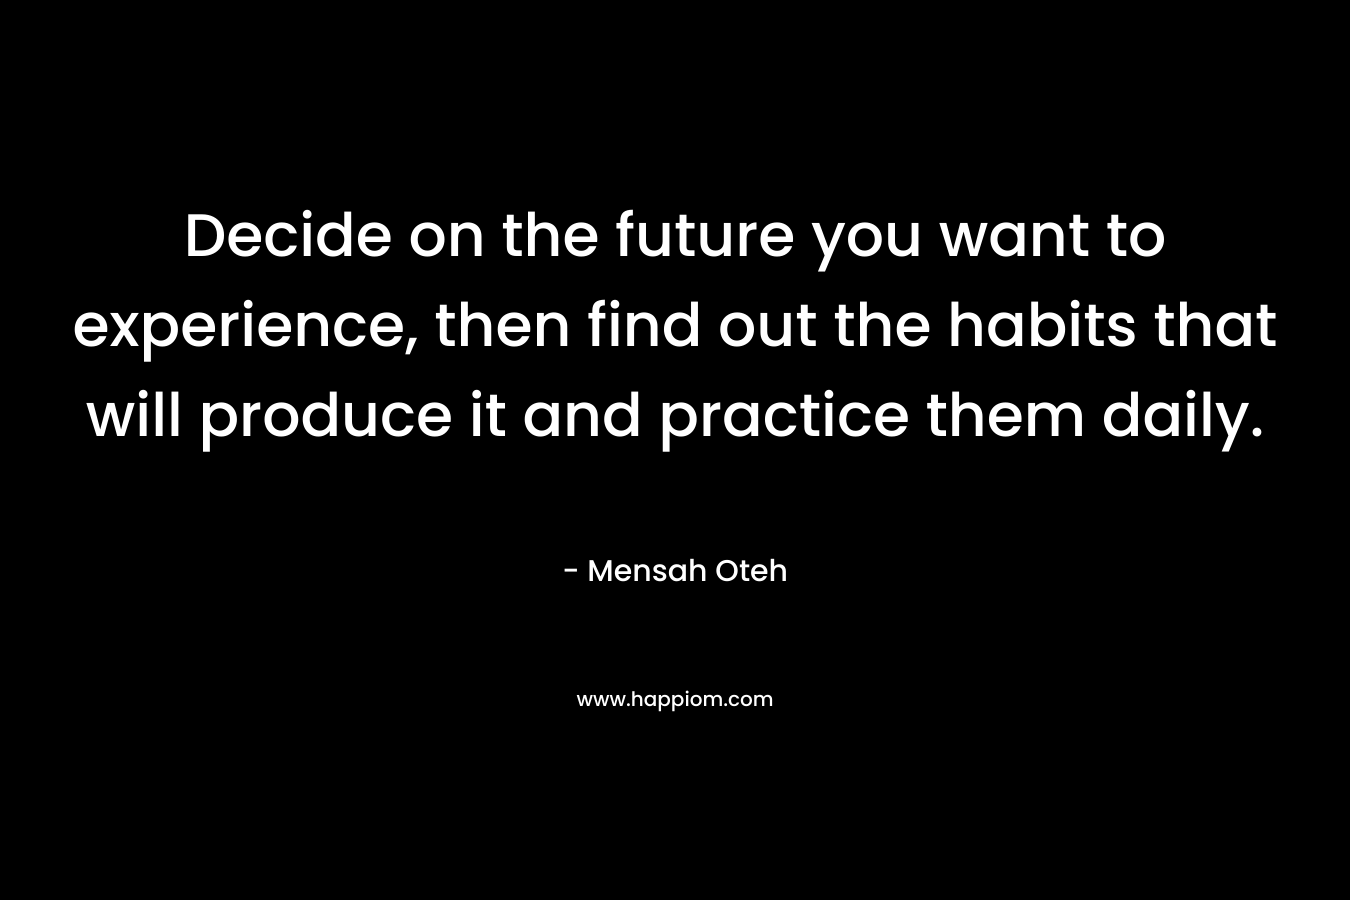 Decide on the future you want to experience, then find out the habits that will produce it and practice them daily.